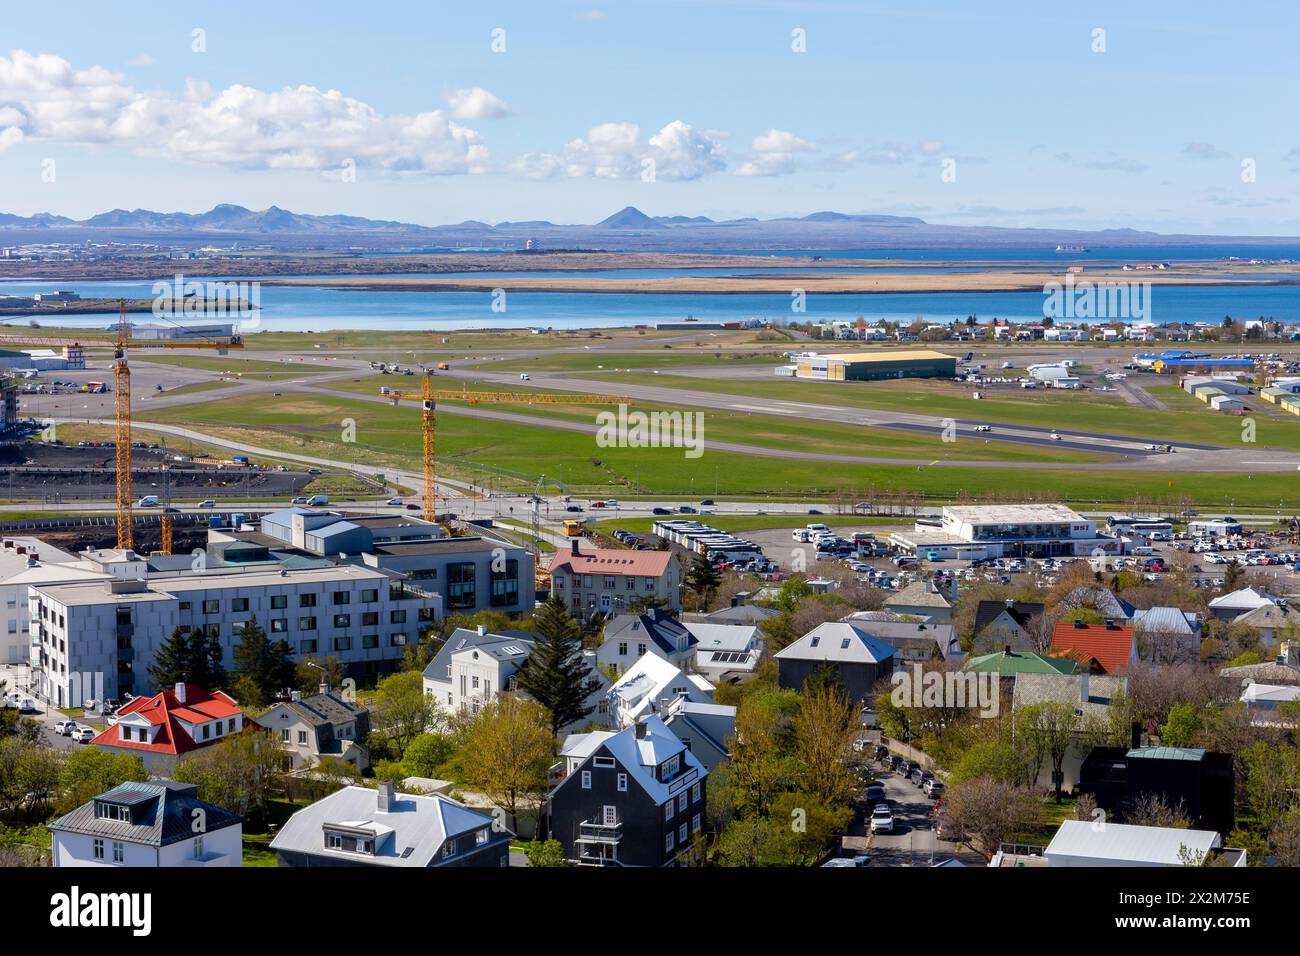 Reykjavik, Iceland, 14.05.22. Reykjavik City domestic airport (RKV), aerial view with runways, terminal buildings, airport infrastructure. Stock Photo